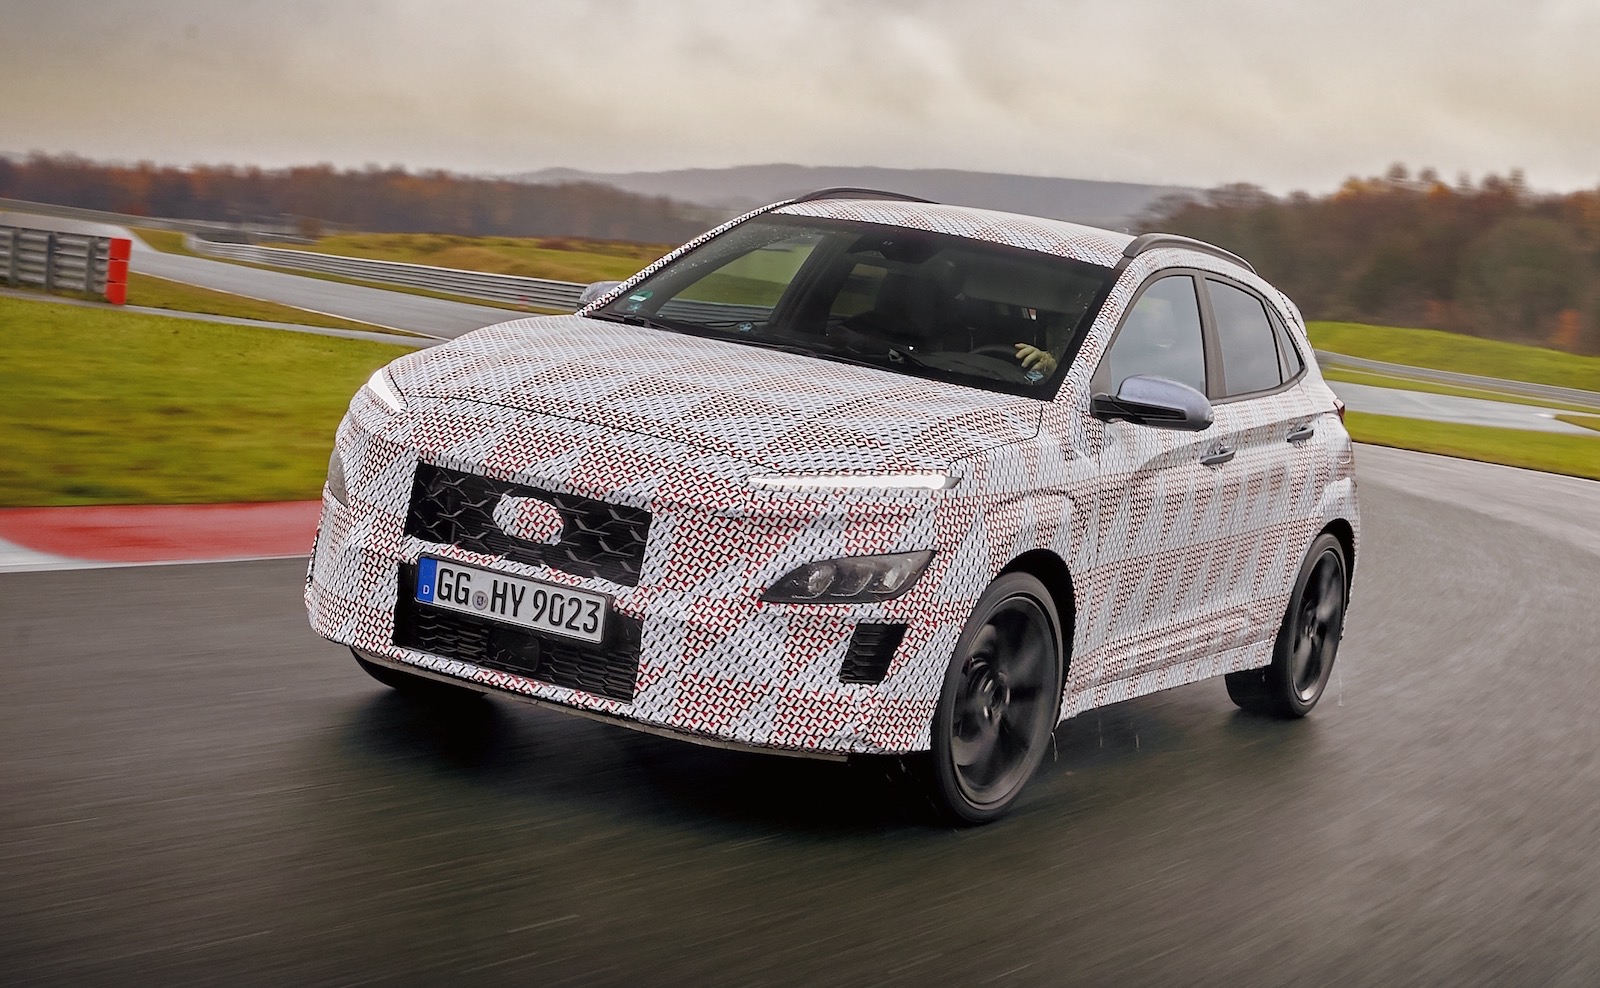 2021 Hyundai Kona N officially previewed, confirmed for Australia